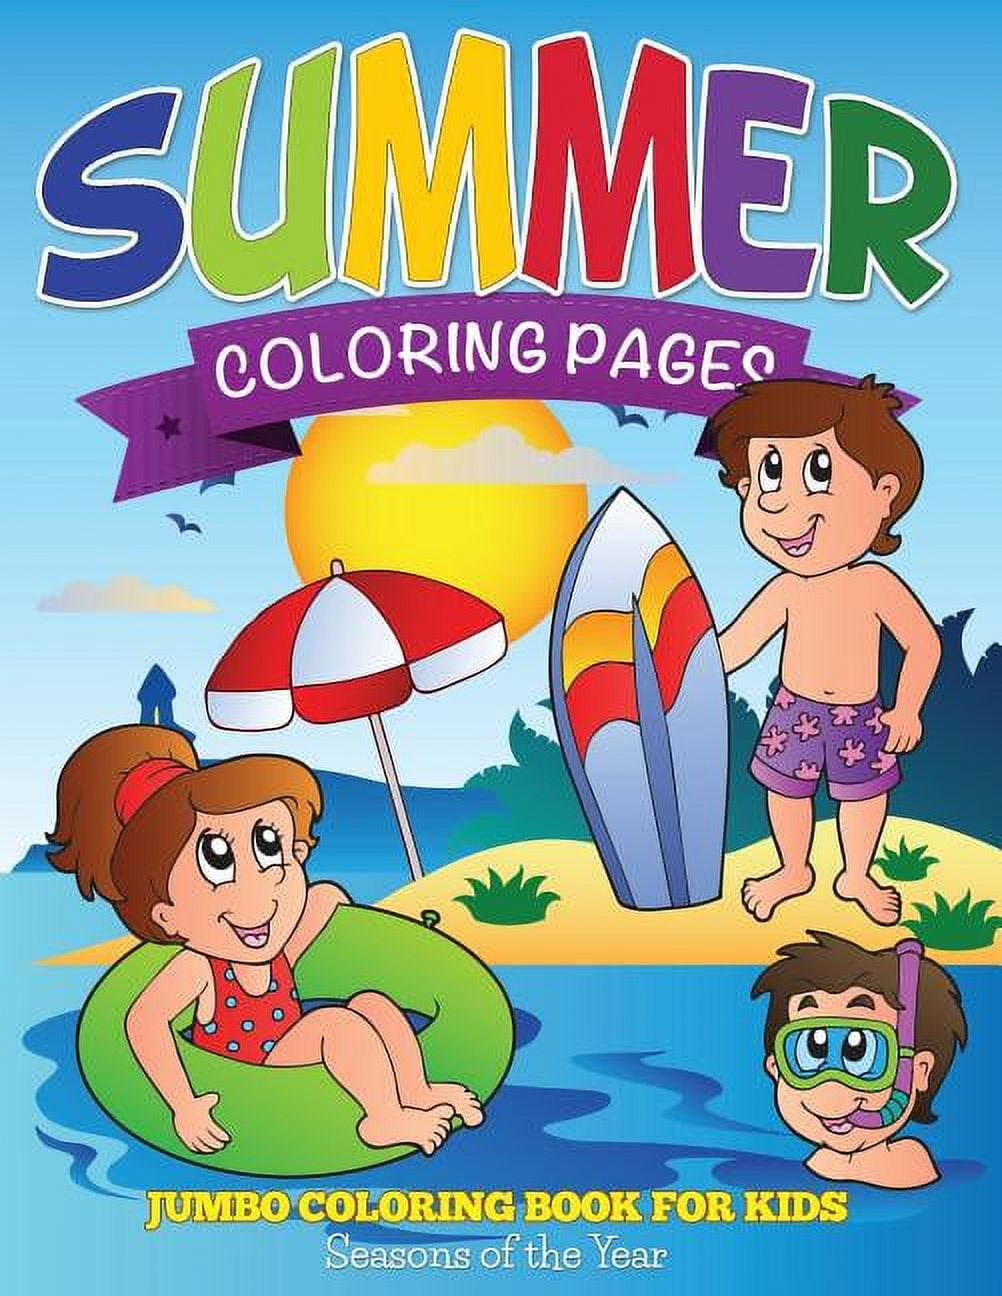 Summer coloring pages jumbo coloring book for kids